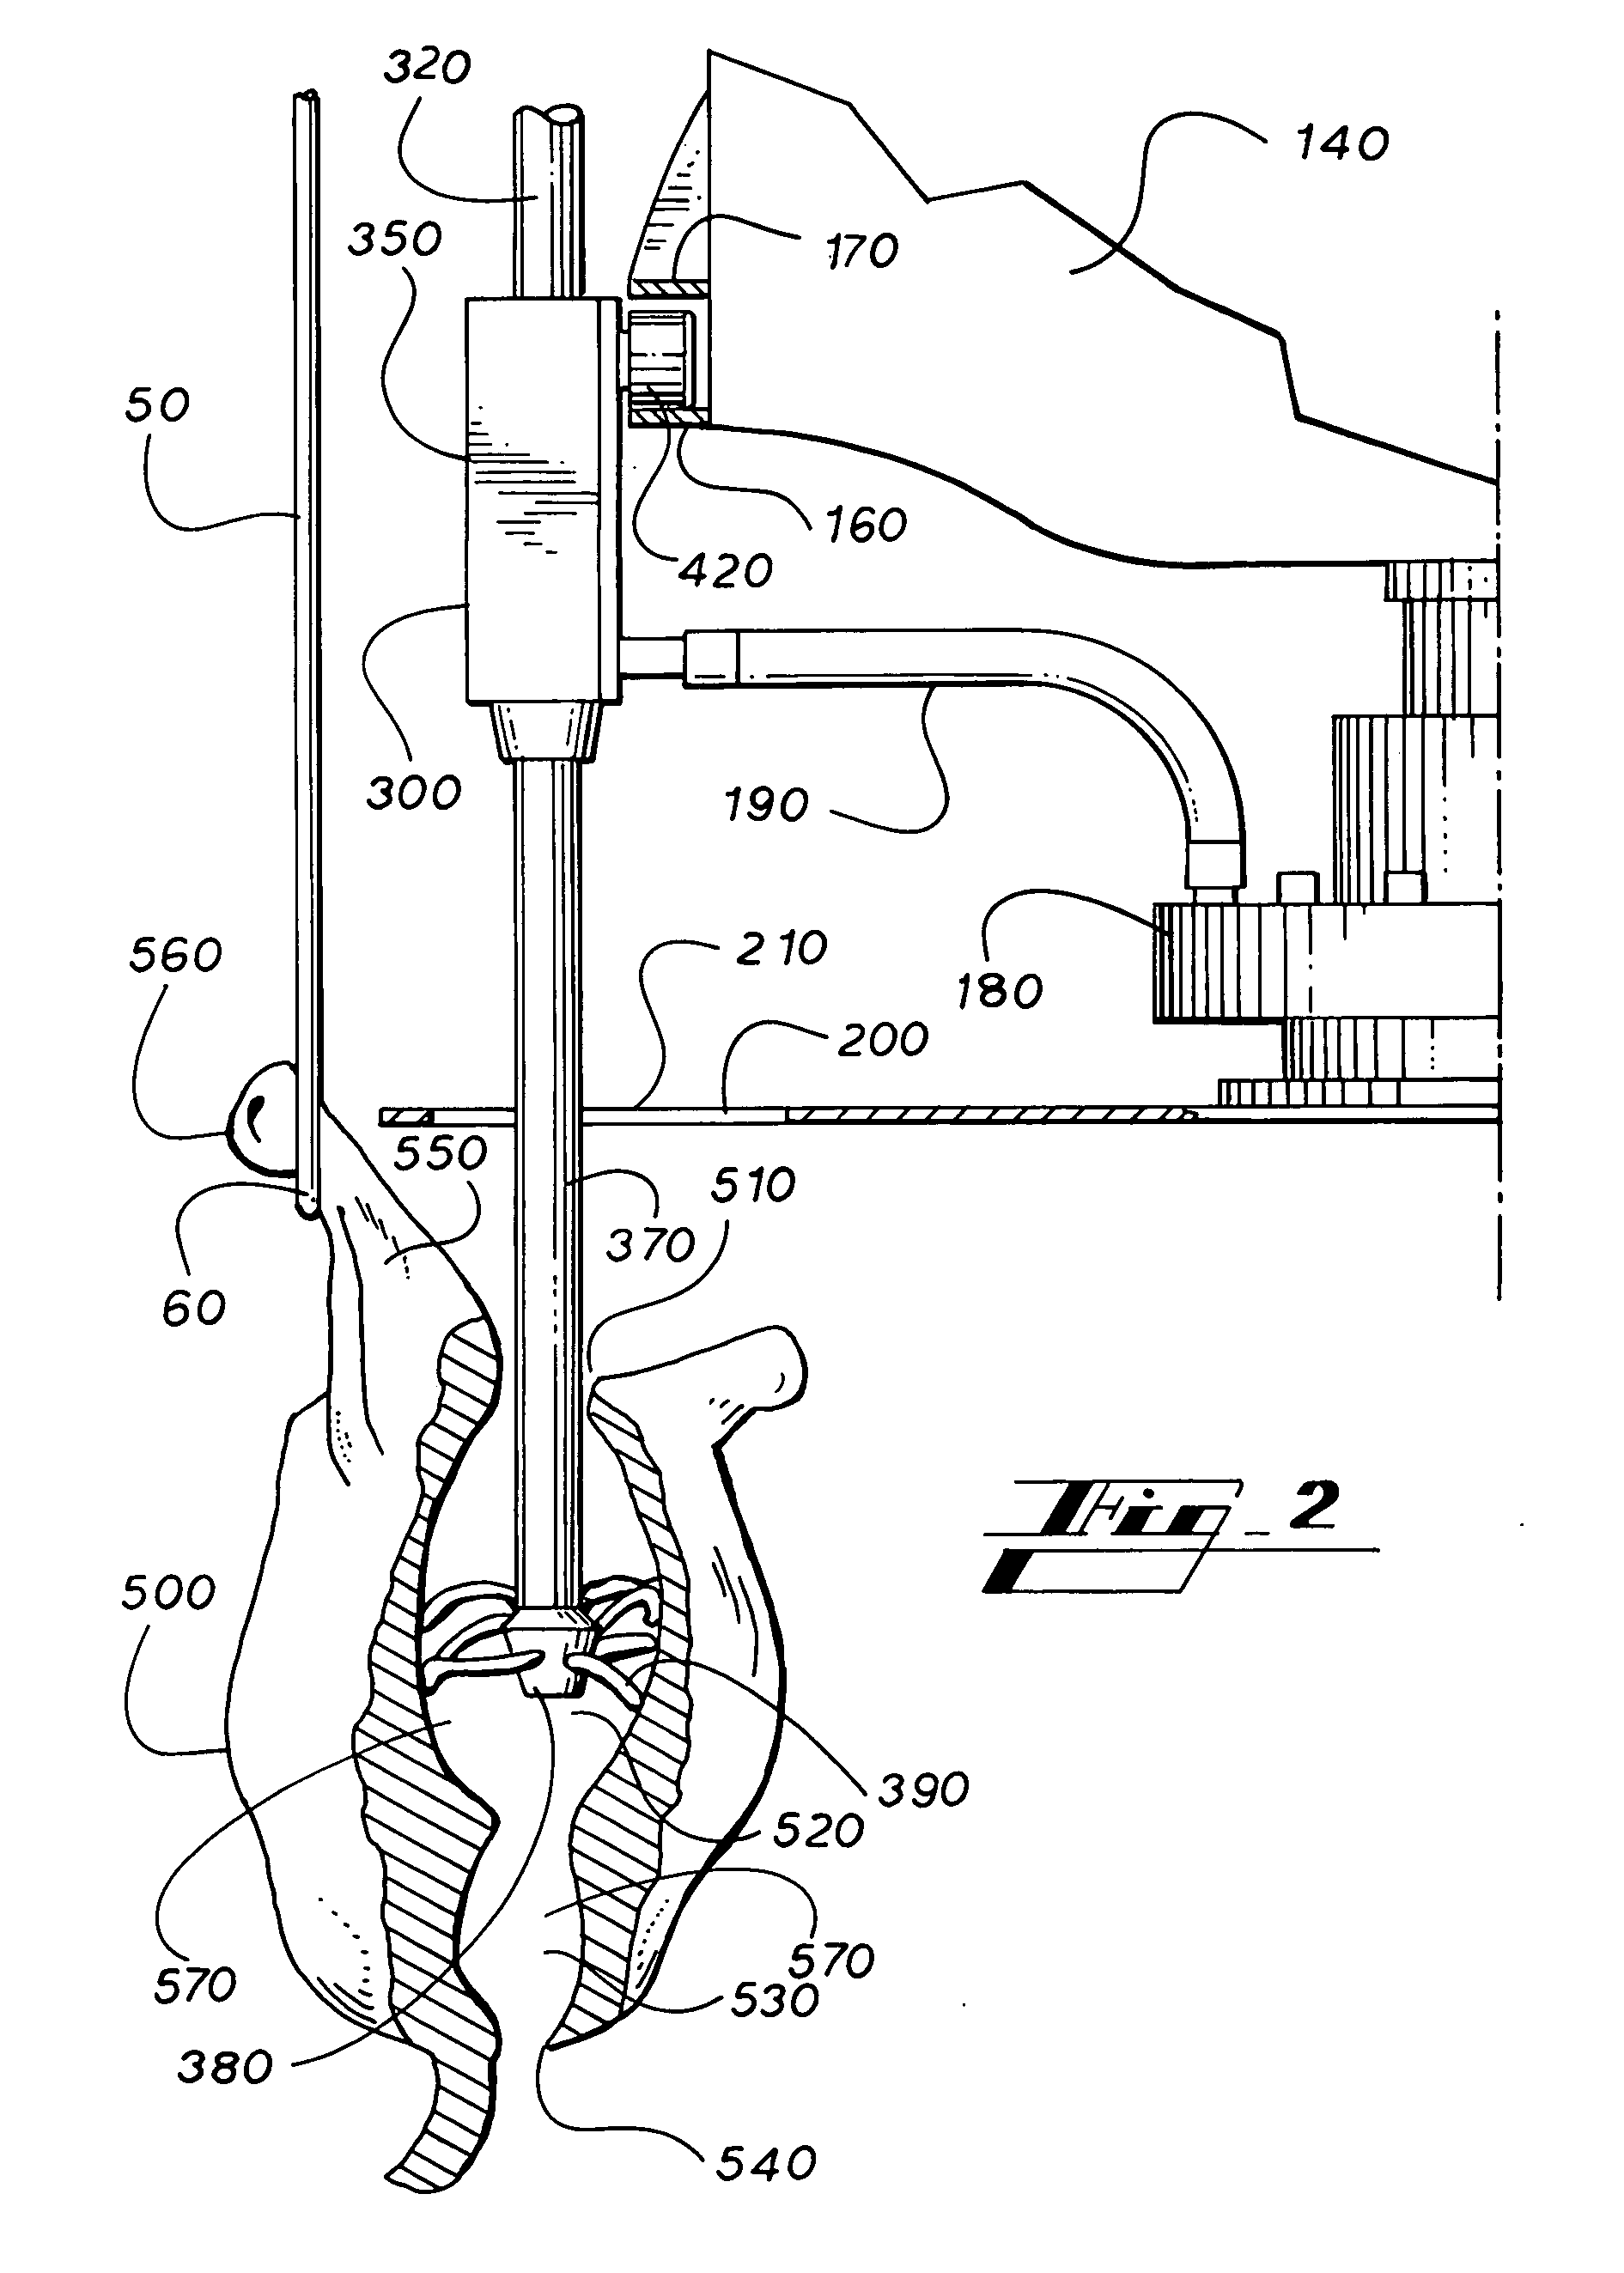 Machine for cleaning fowl and method of use thereof